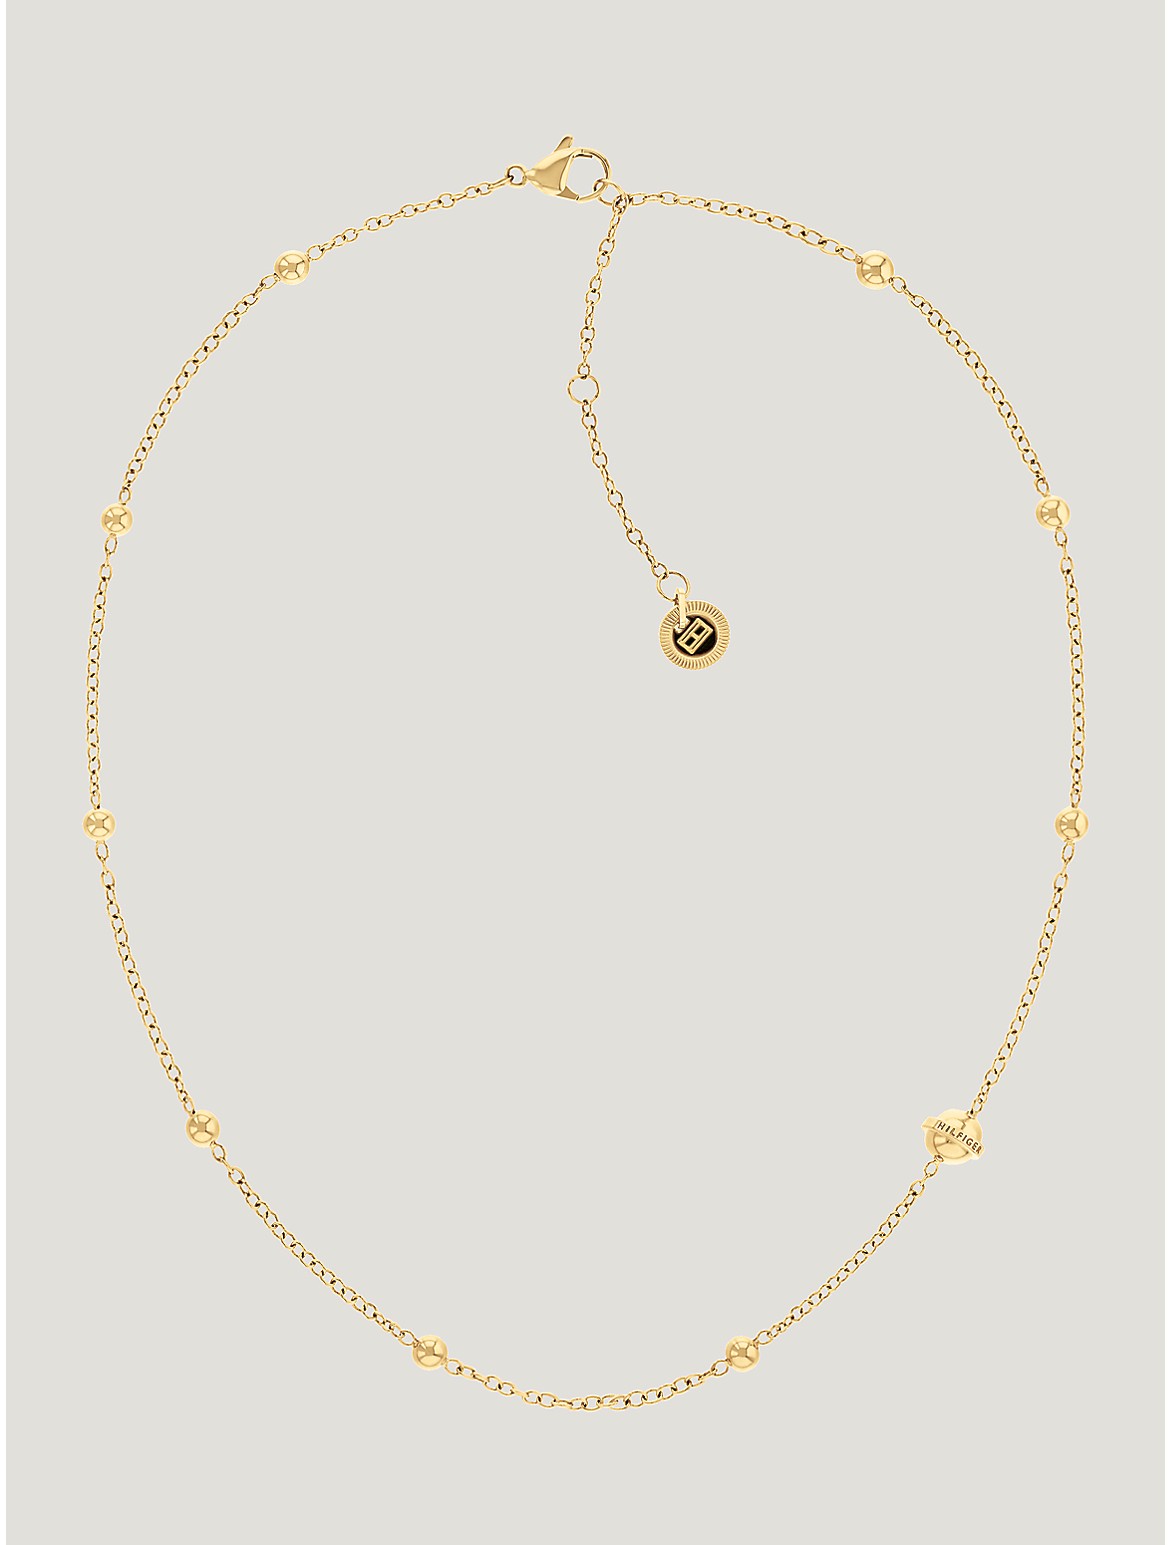 Tommy Hilfiger Women's Gold-Tone Orb Necklace